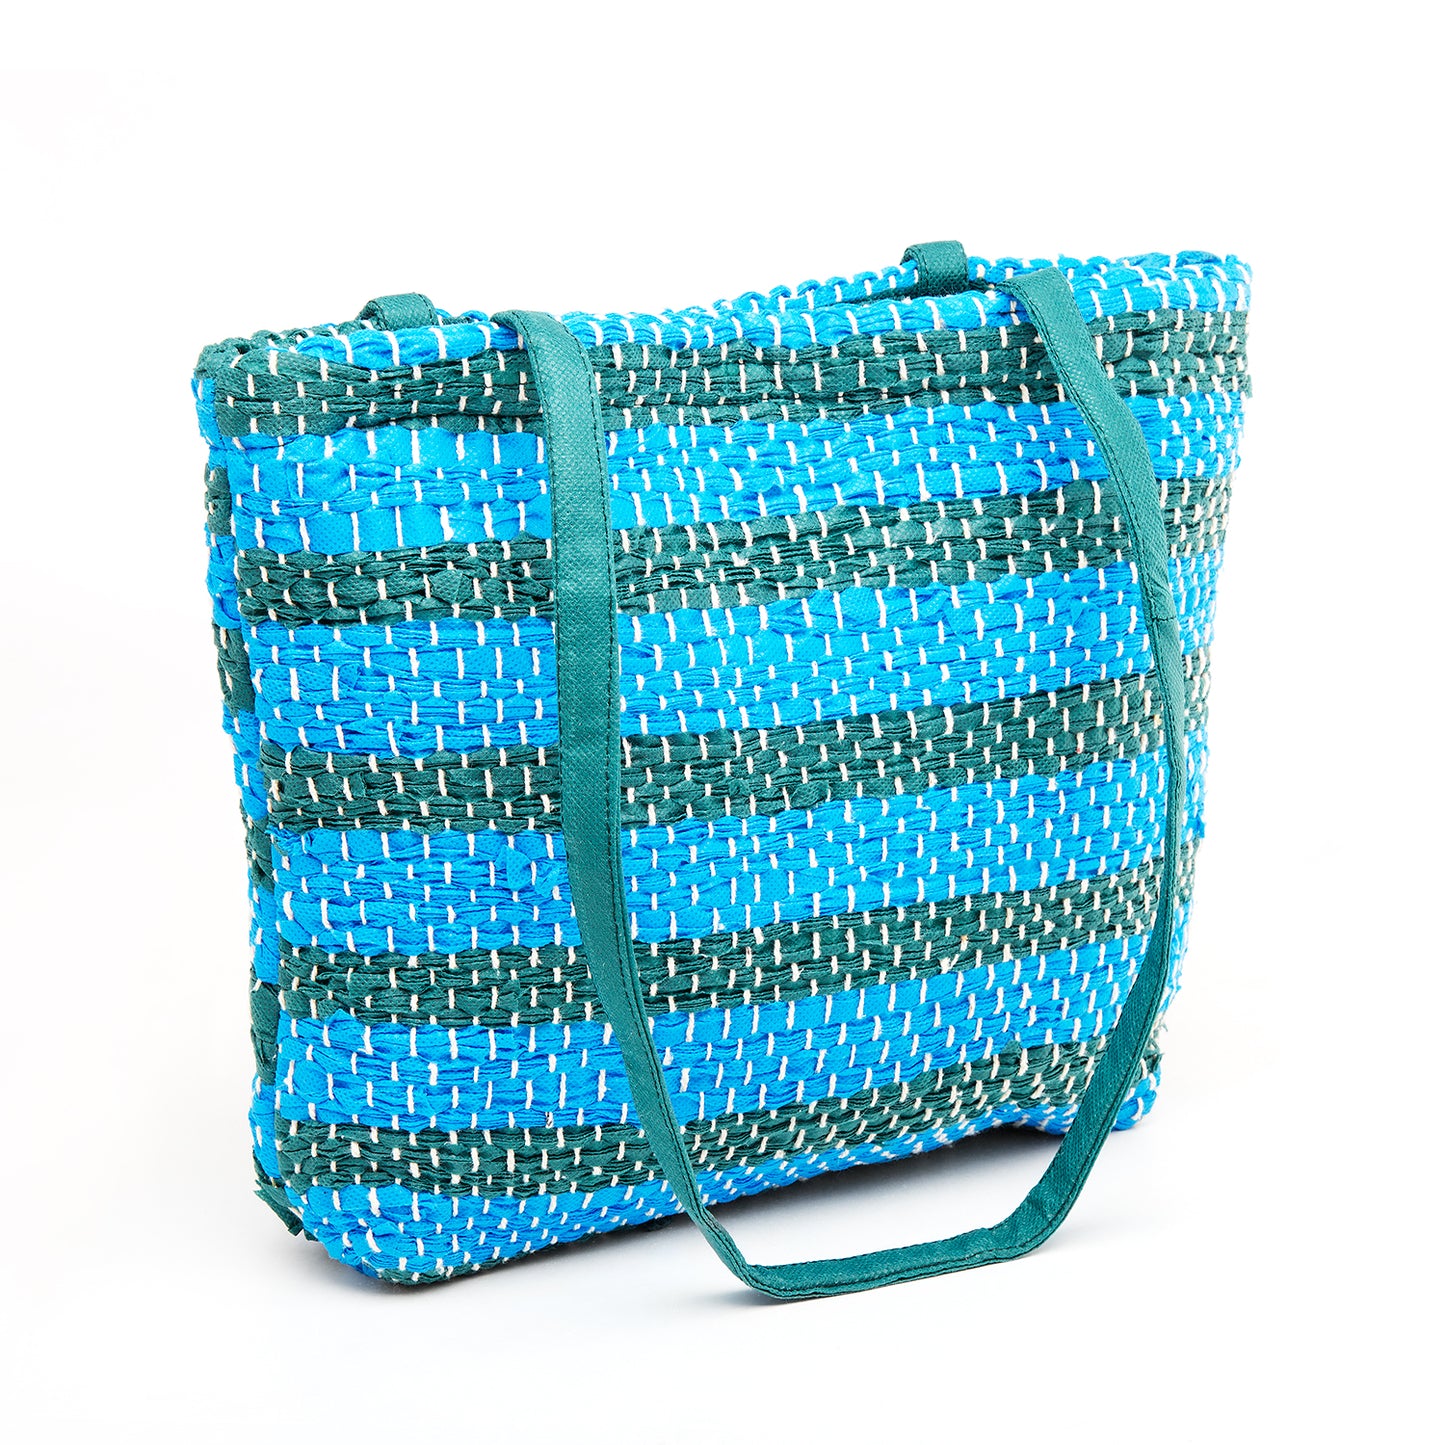 Cerulean Blue & Ocean Blue Colored Recycled Non-Woven Fabric Bag